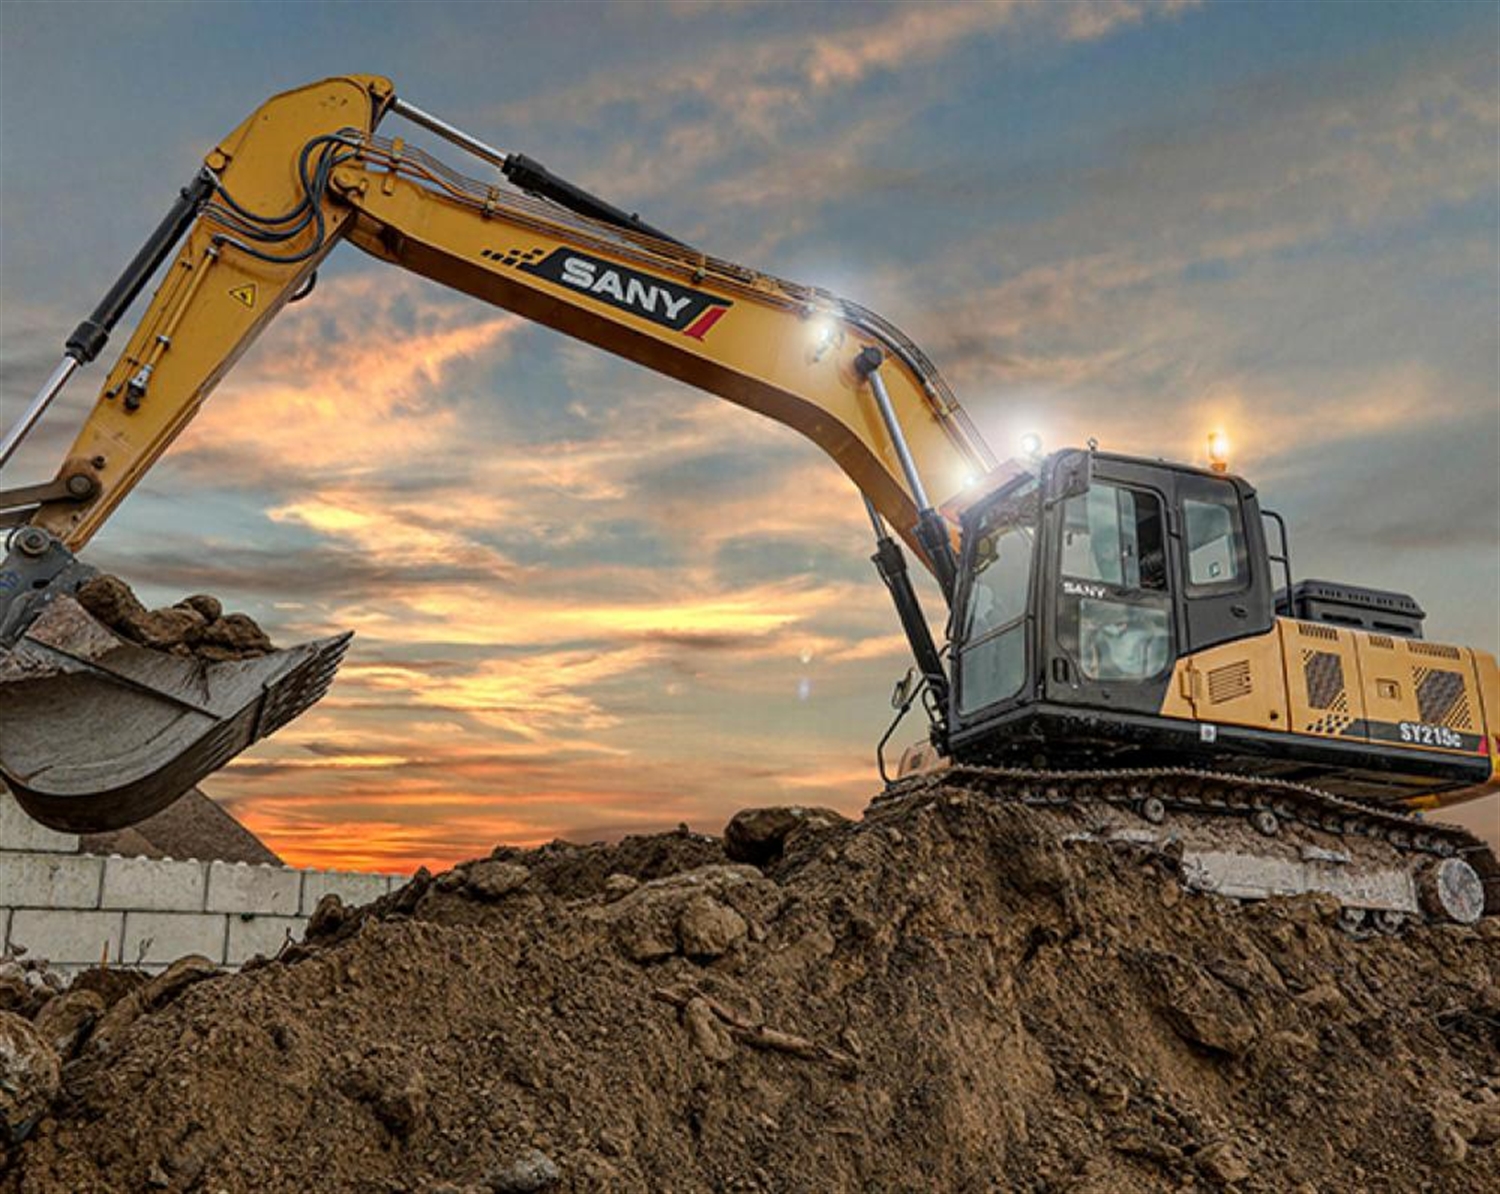 Safety and efficiency in focus - Xwatch and Sleator Plant partnership.